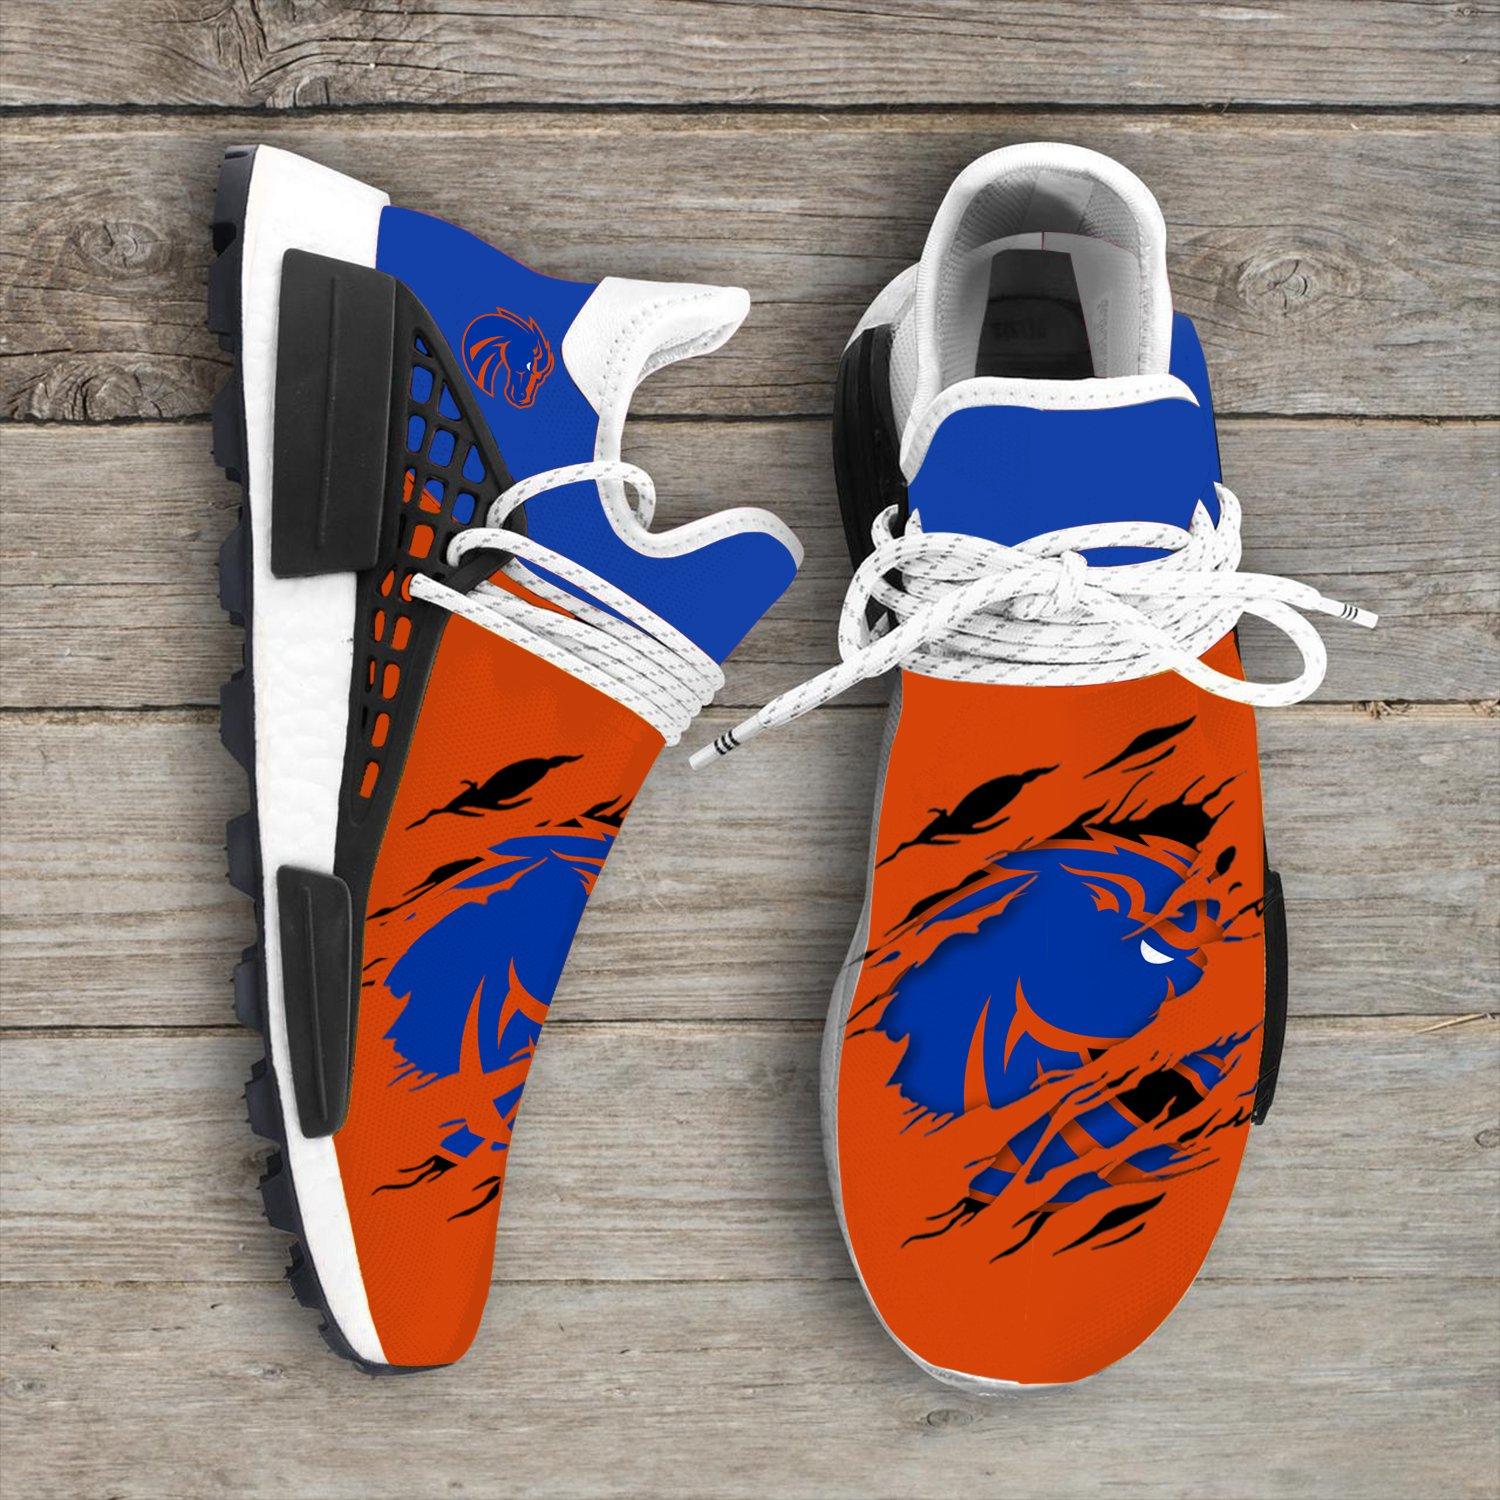 pålidelighed champion PEF Boise State Broncos NMD Custom Sneakers Top Branding Trends 2020 –  dyotees.com Shirts | Shop Funny T Shirts | Make Your Own Custom T Shirts